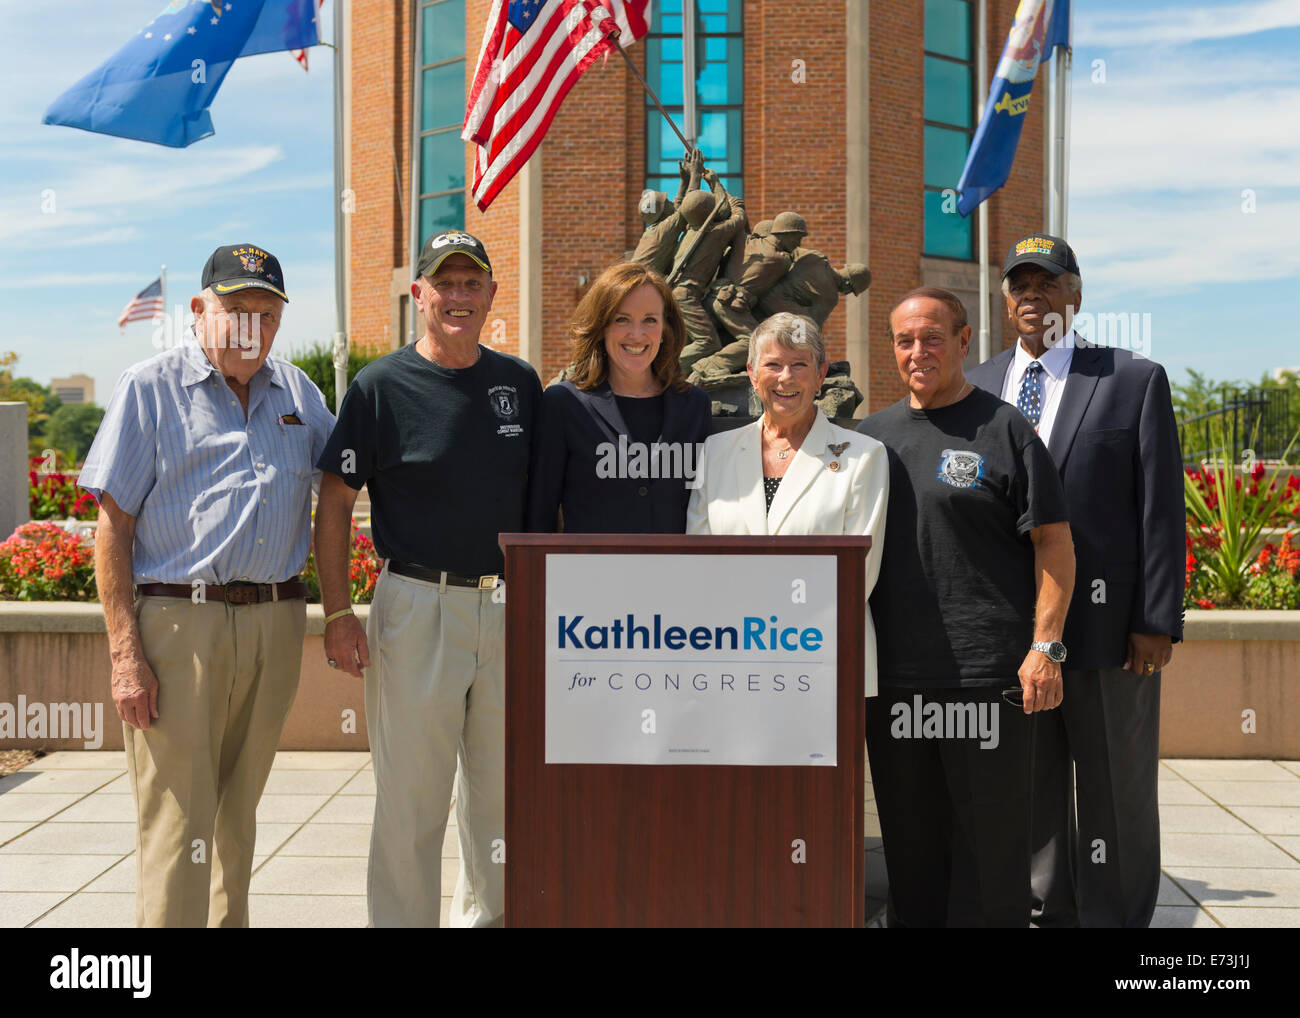 East Meadow, New York, USA. 3rd September, 2014.  At center, KATHLEEN RICE (in black), Democratic congressional candidate (NY-04), and outgoing Representative CAROLYN MCCARTHY (in white) are at Veterans Memorial at Eisenhower Park, after they toured Northport VA Medical Center. Rice released a whitepaper on veterans policy and announced the formation of her campaign's new Veterans Advisory Committee, and 4 of its members participated at the press conference: PAUL ZYDOR, (in blue shirt) of Merrick, U.S. Navy, Korean War Veteran; PAT YNGSTROM, (in black T-shirt and cap) of Merrick, U.S. © Ann E Stock Photo